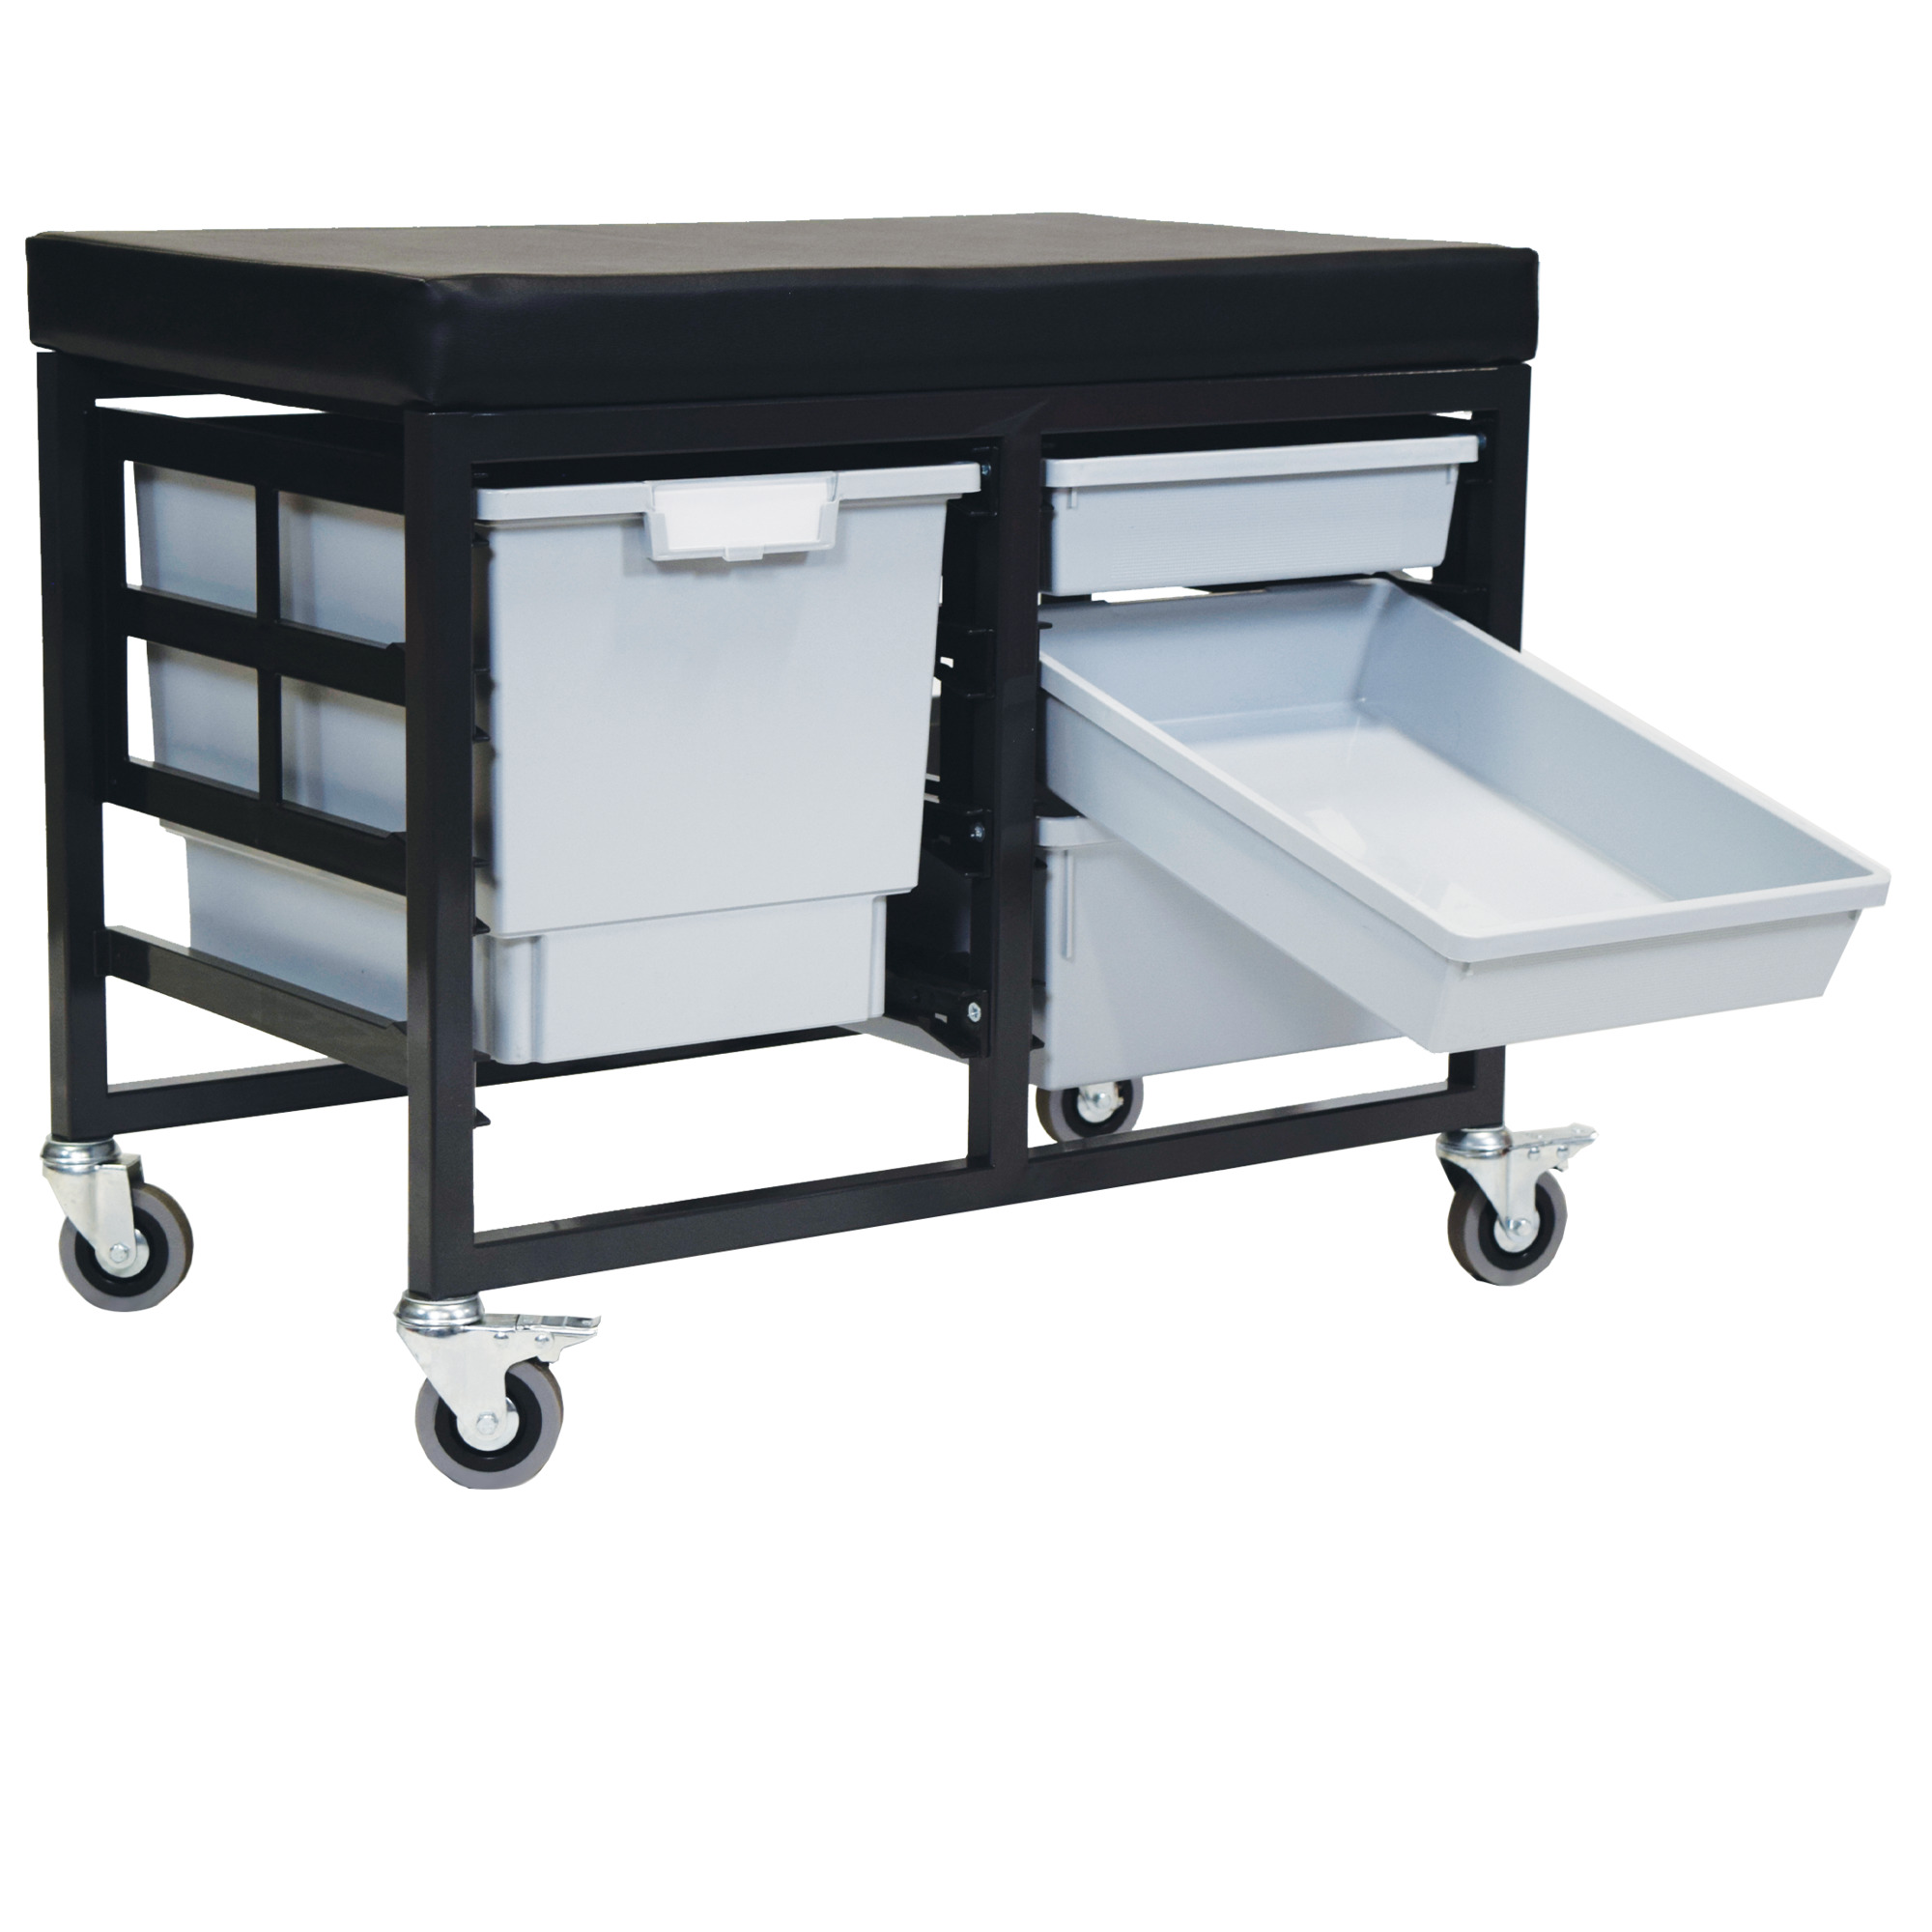 Certwood StorWerks, StorBenchSeat w/ 3 Storsystem Trays and Bins-Gray, Included (qty.) 3, Material Plastic, Height 12 in, Model CE2109DGGC-2S1D1QLG